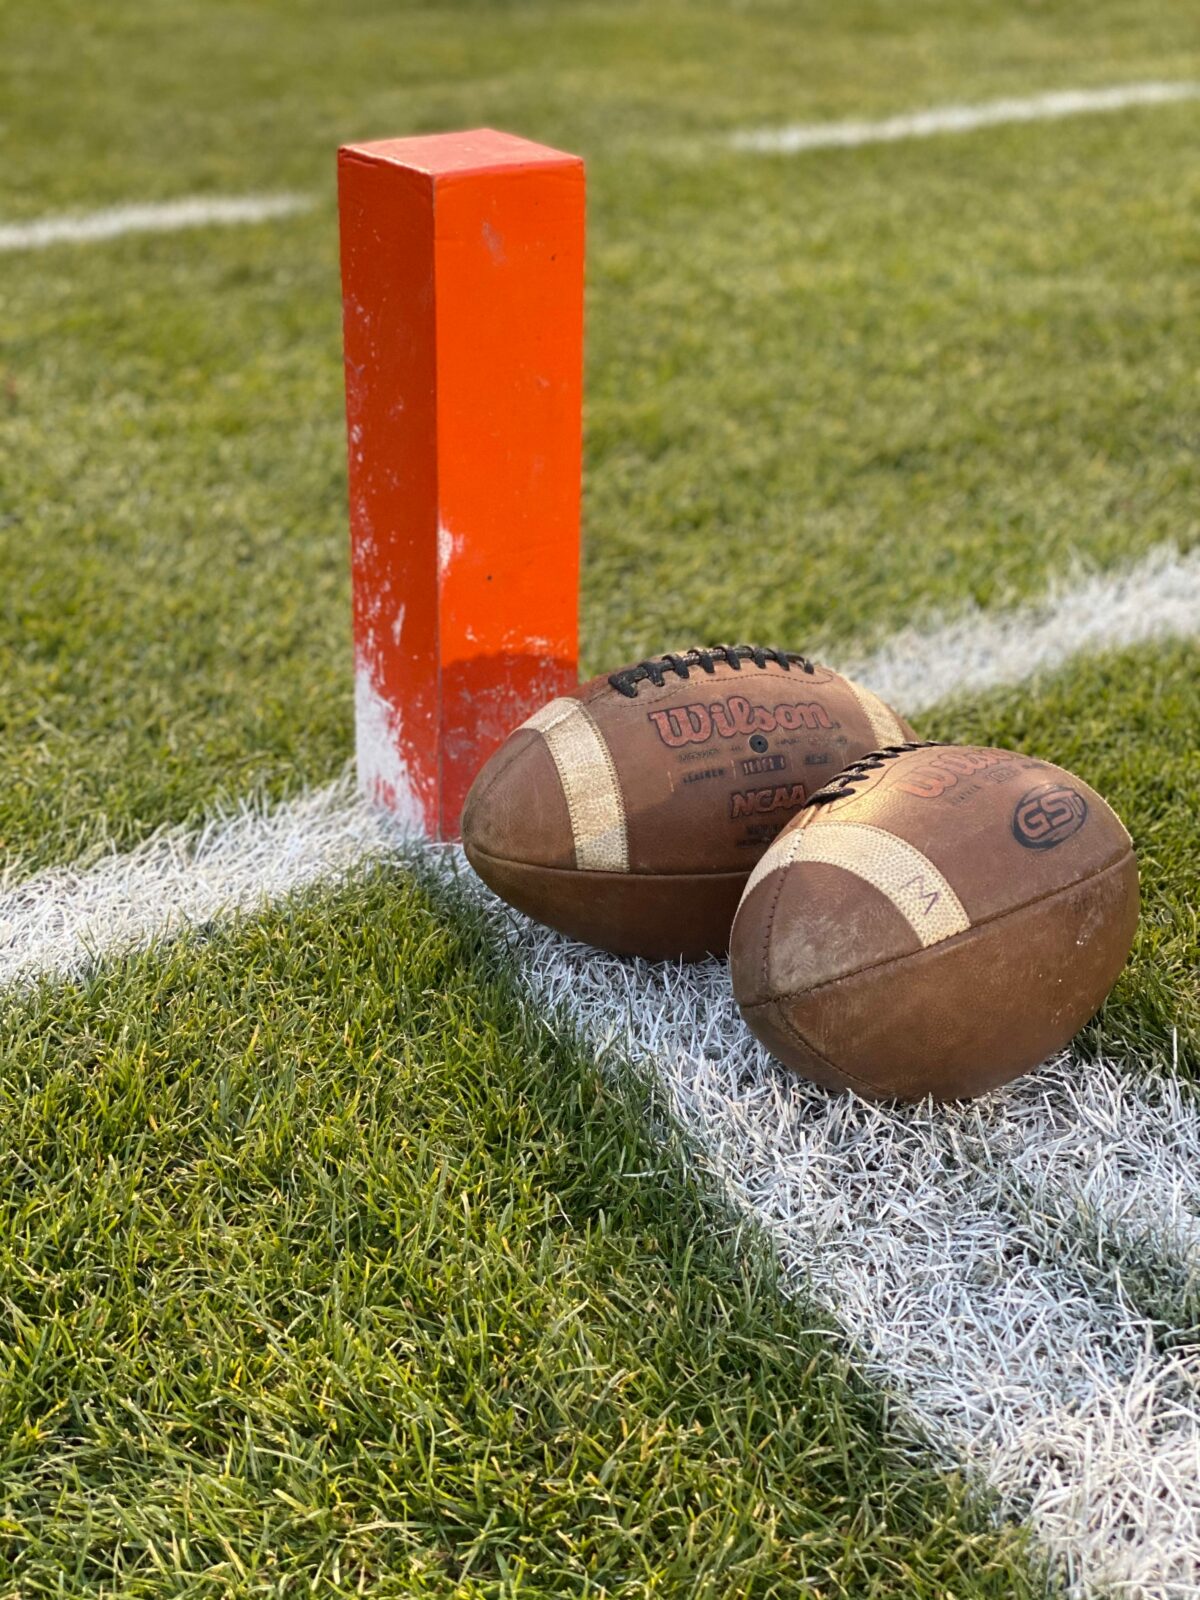 Middletown cancels football season after more hazing videos emerge